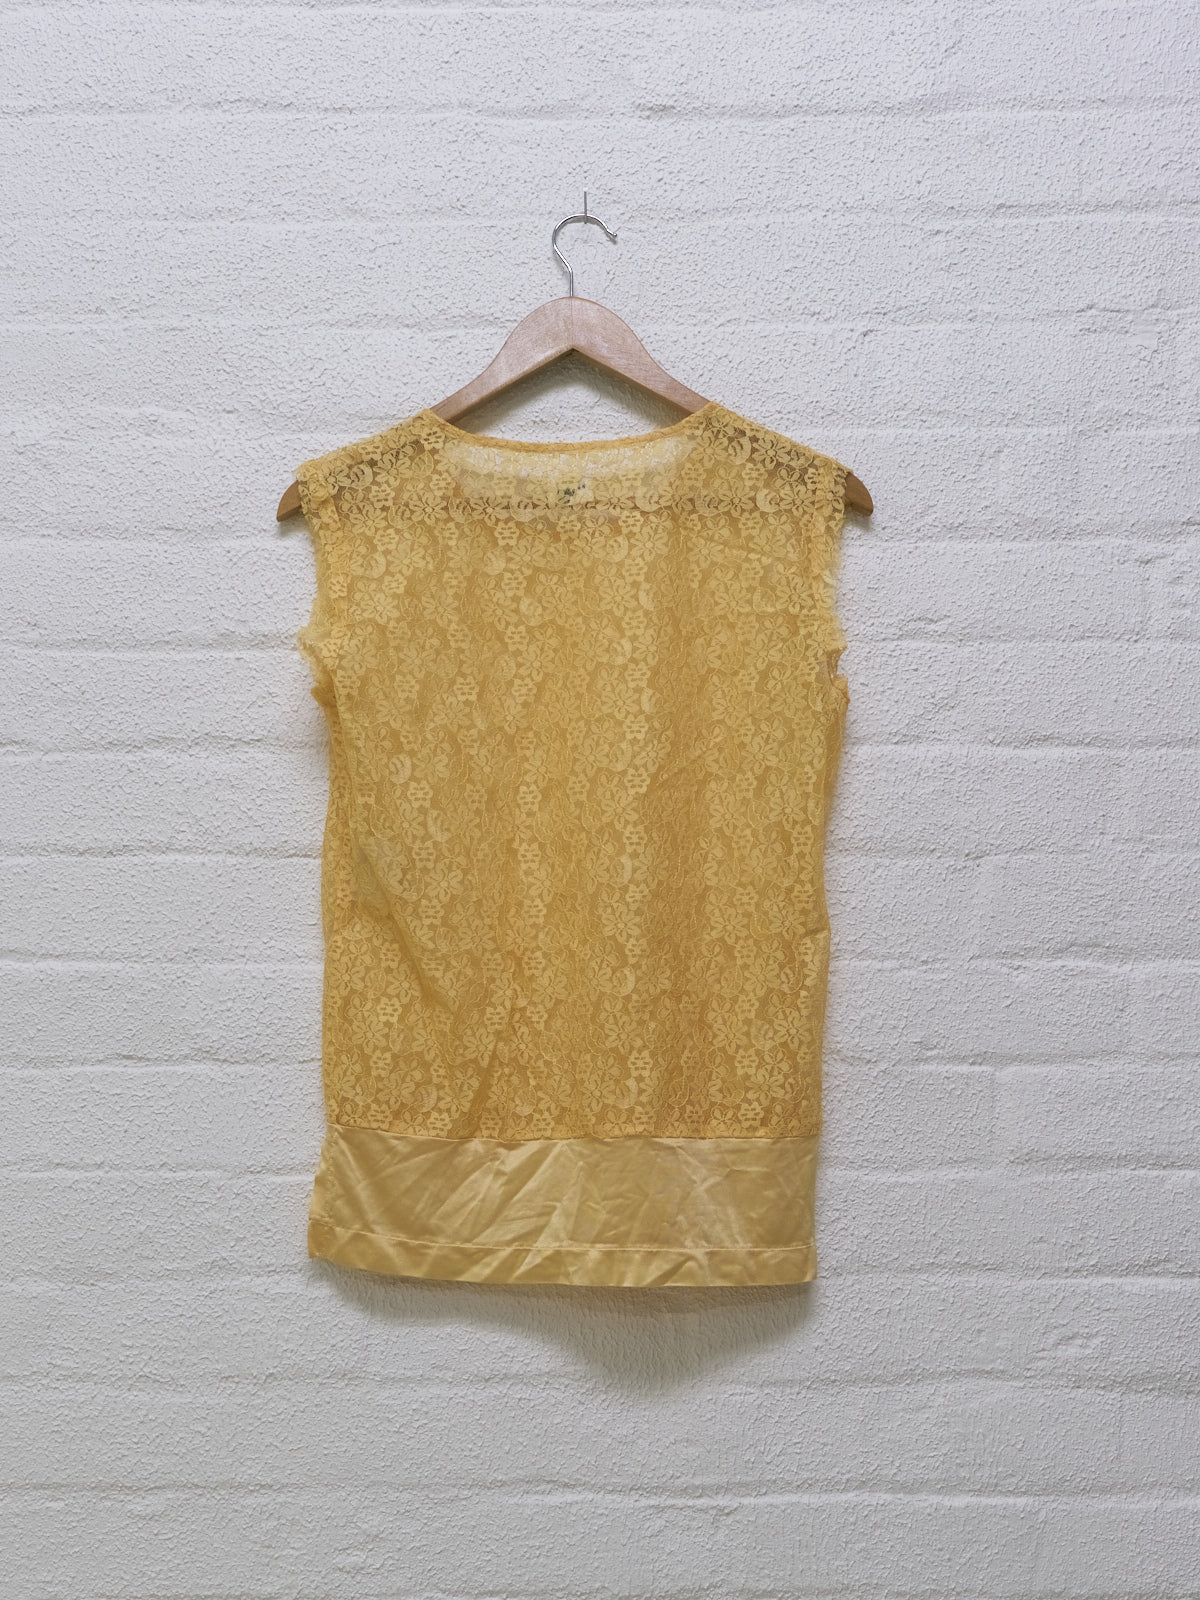 Comme des Garcons 1995 lace sleeveless top with satin hem panel - womens S